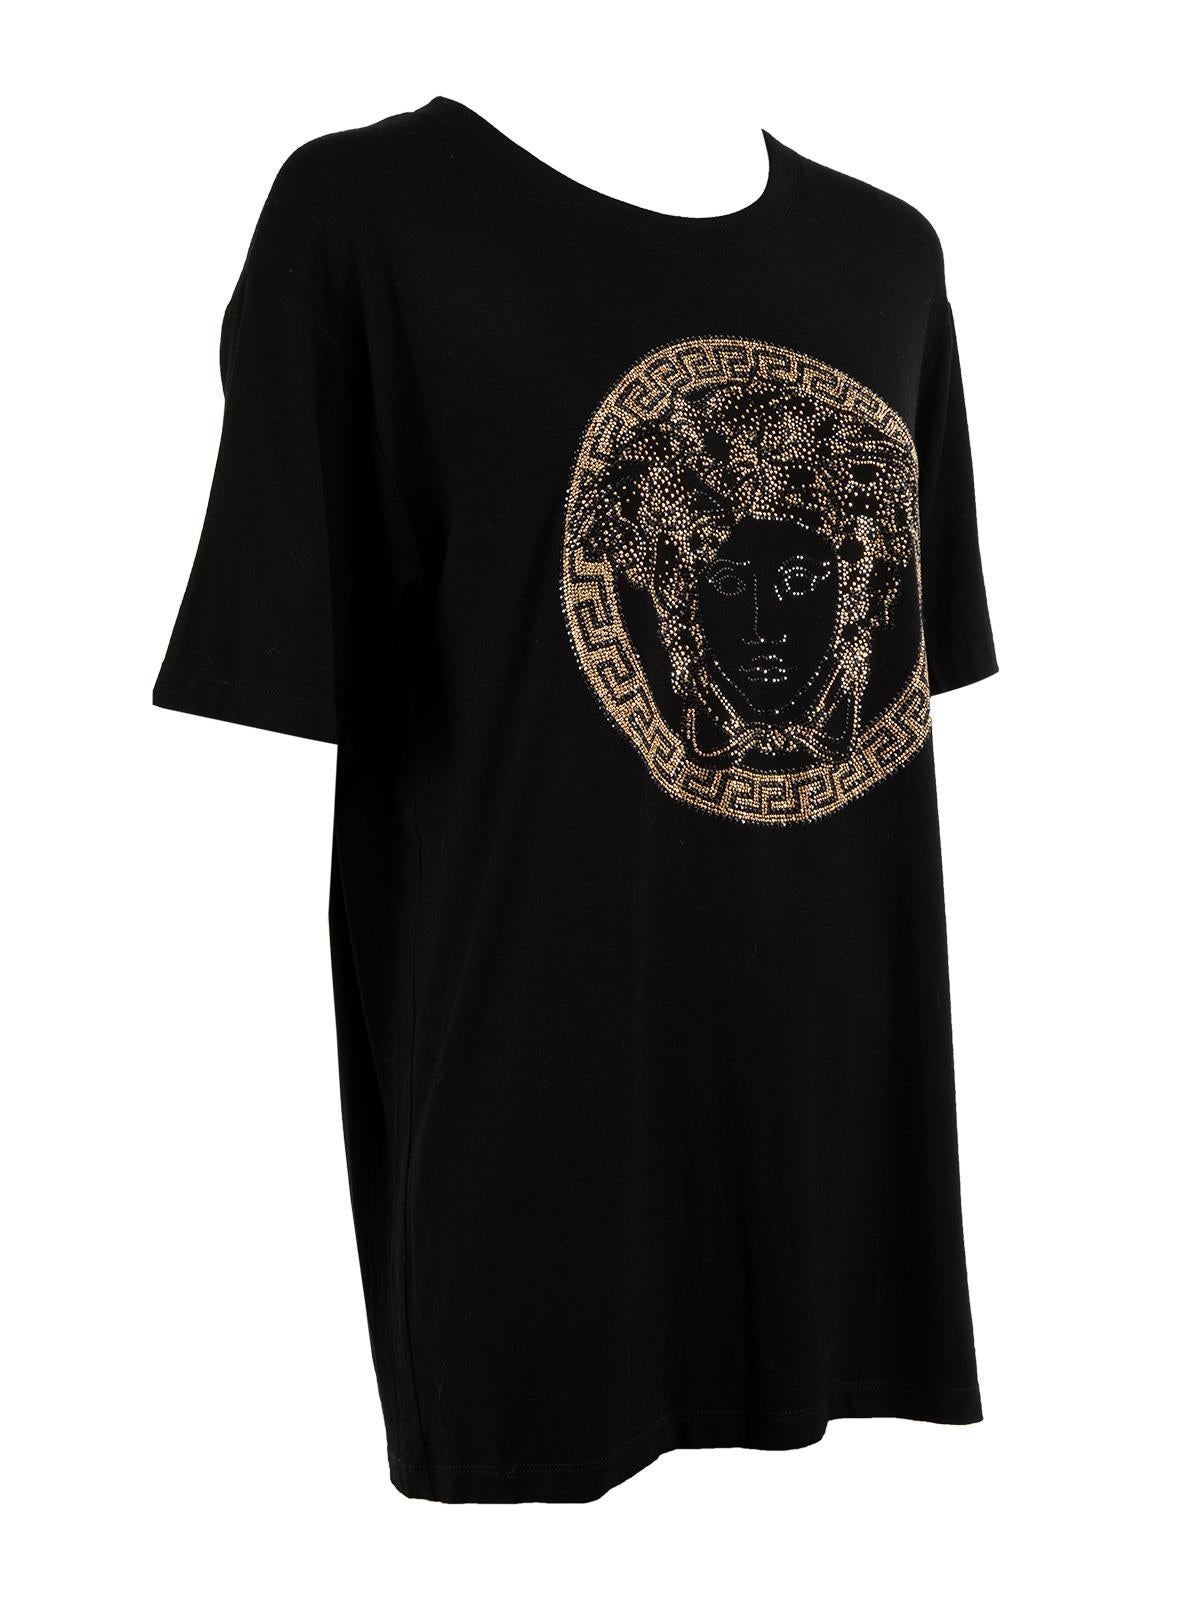 CONDITION is Very good. Minimal wear to T-shirt is evident. Light pilling seen on this used Versace designer resale item.  Details  Black Viscose and elastane T-shirt Brand logo embroidery Slip on fastening   Made in Italy    Composition 95%